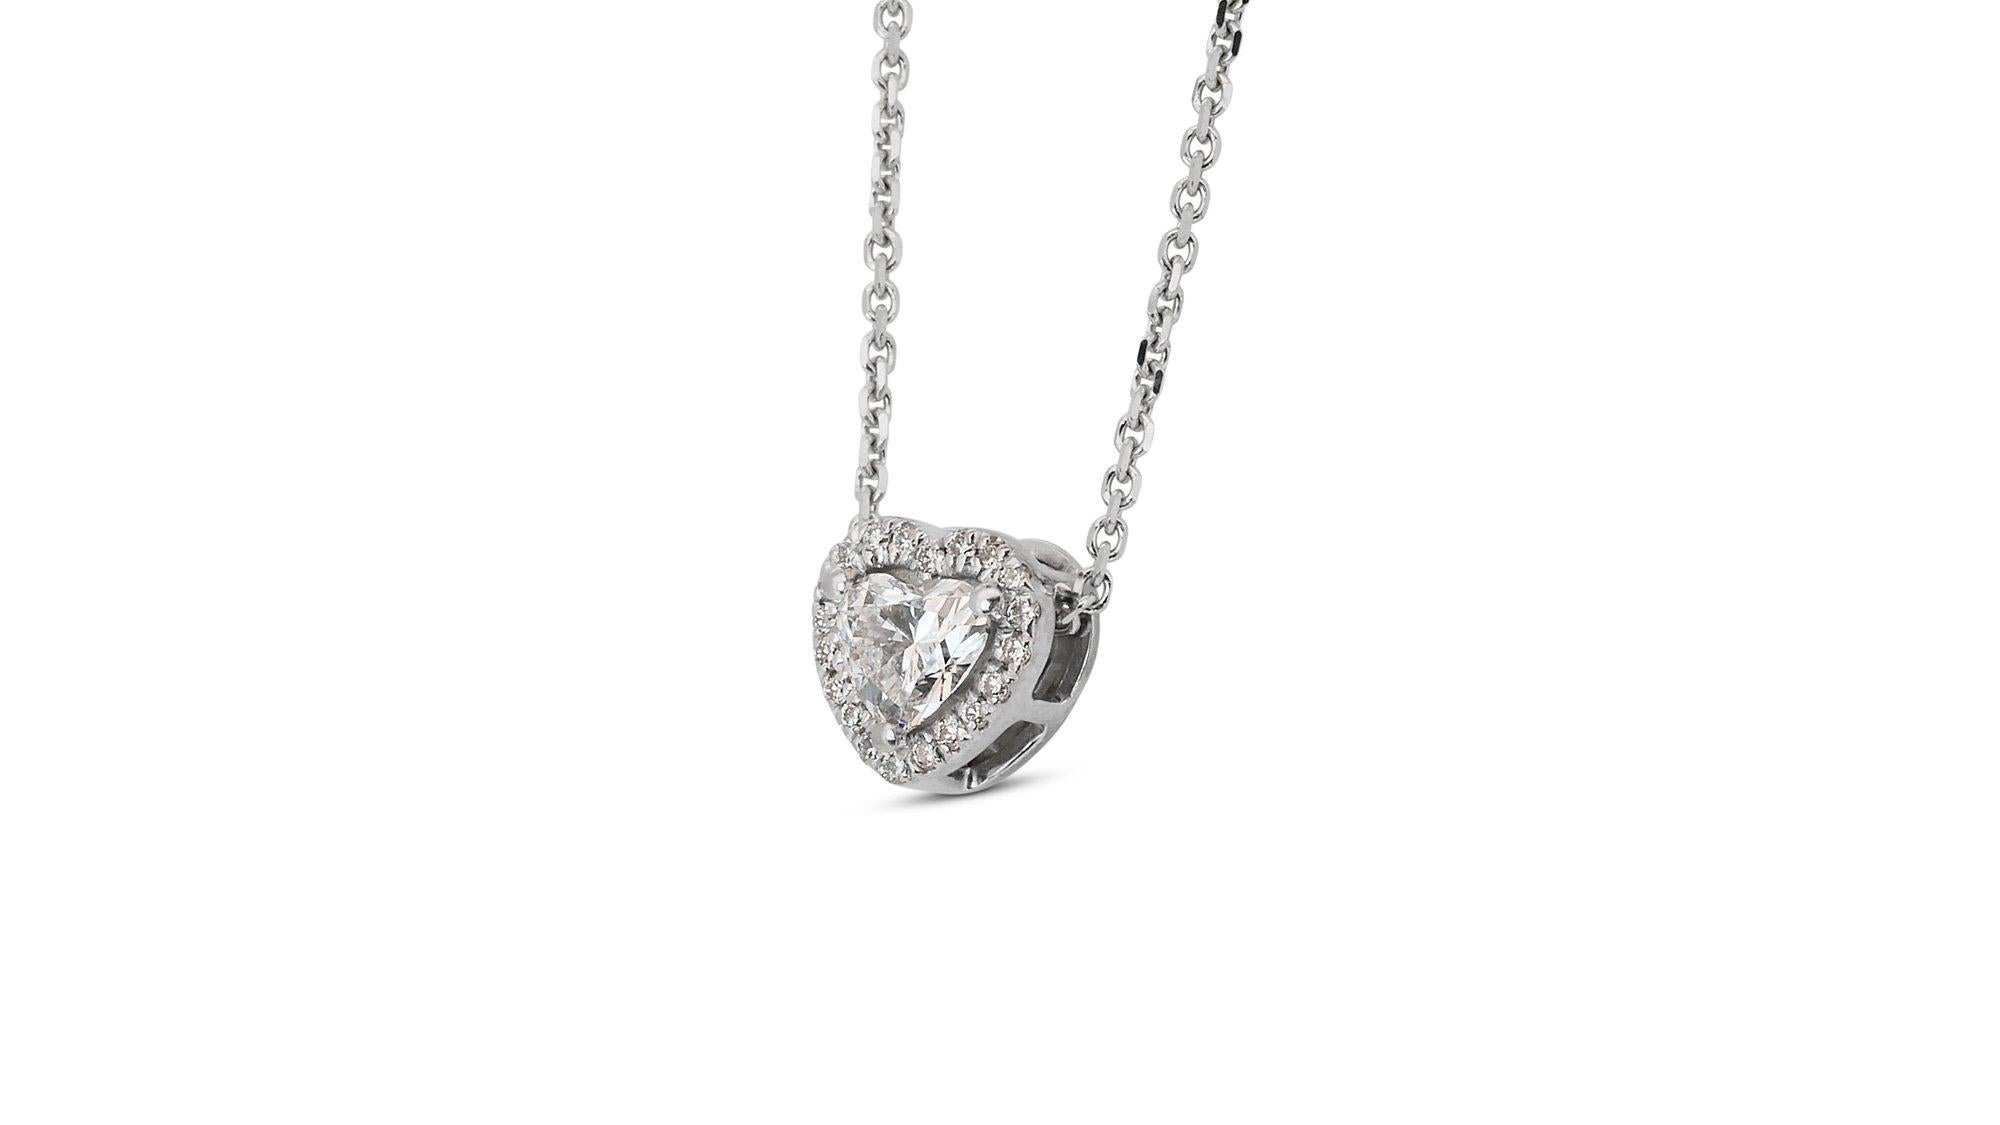 Women's 18k White Gold Heart Necklace with Pendant w/ 0.35ct Natural Diamonds GIA Cert.